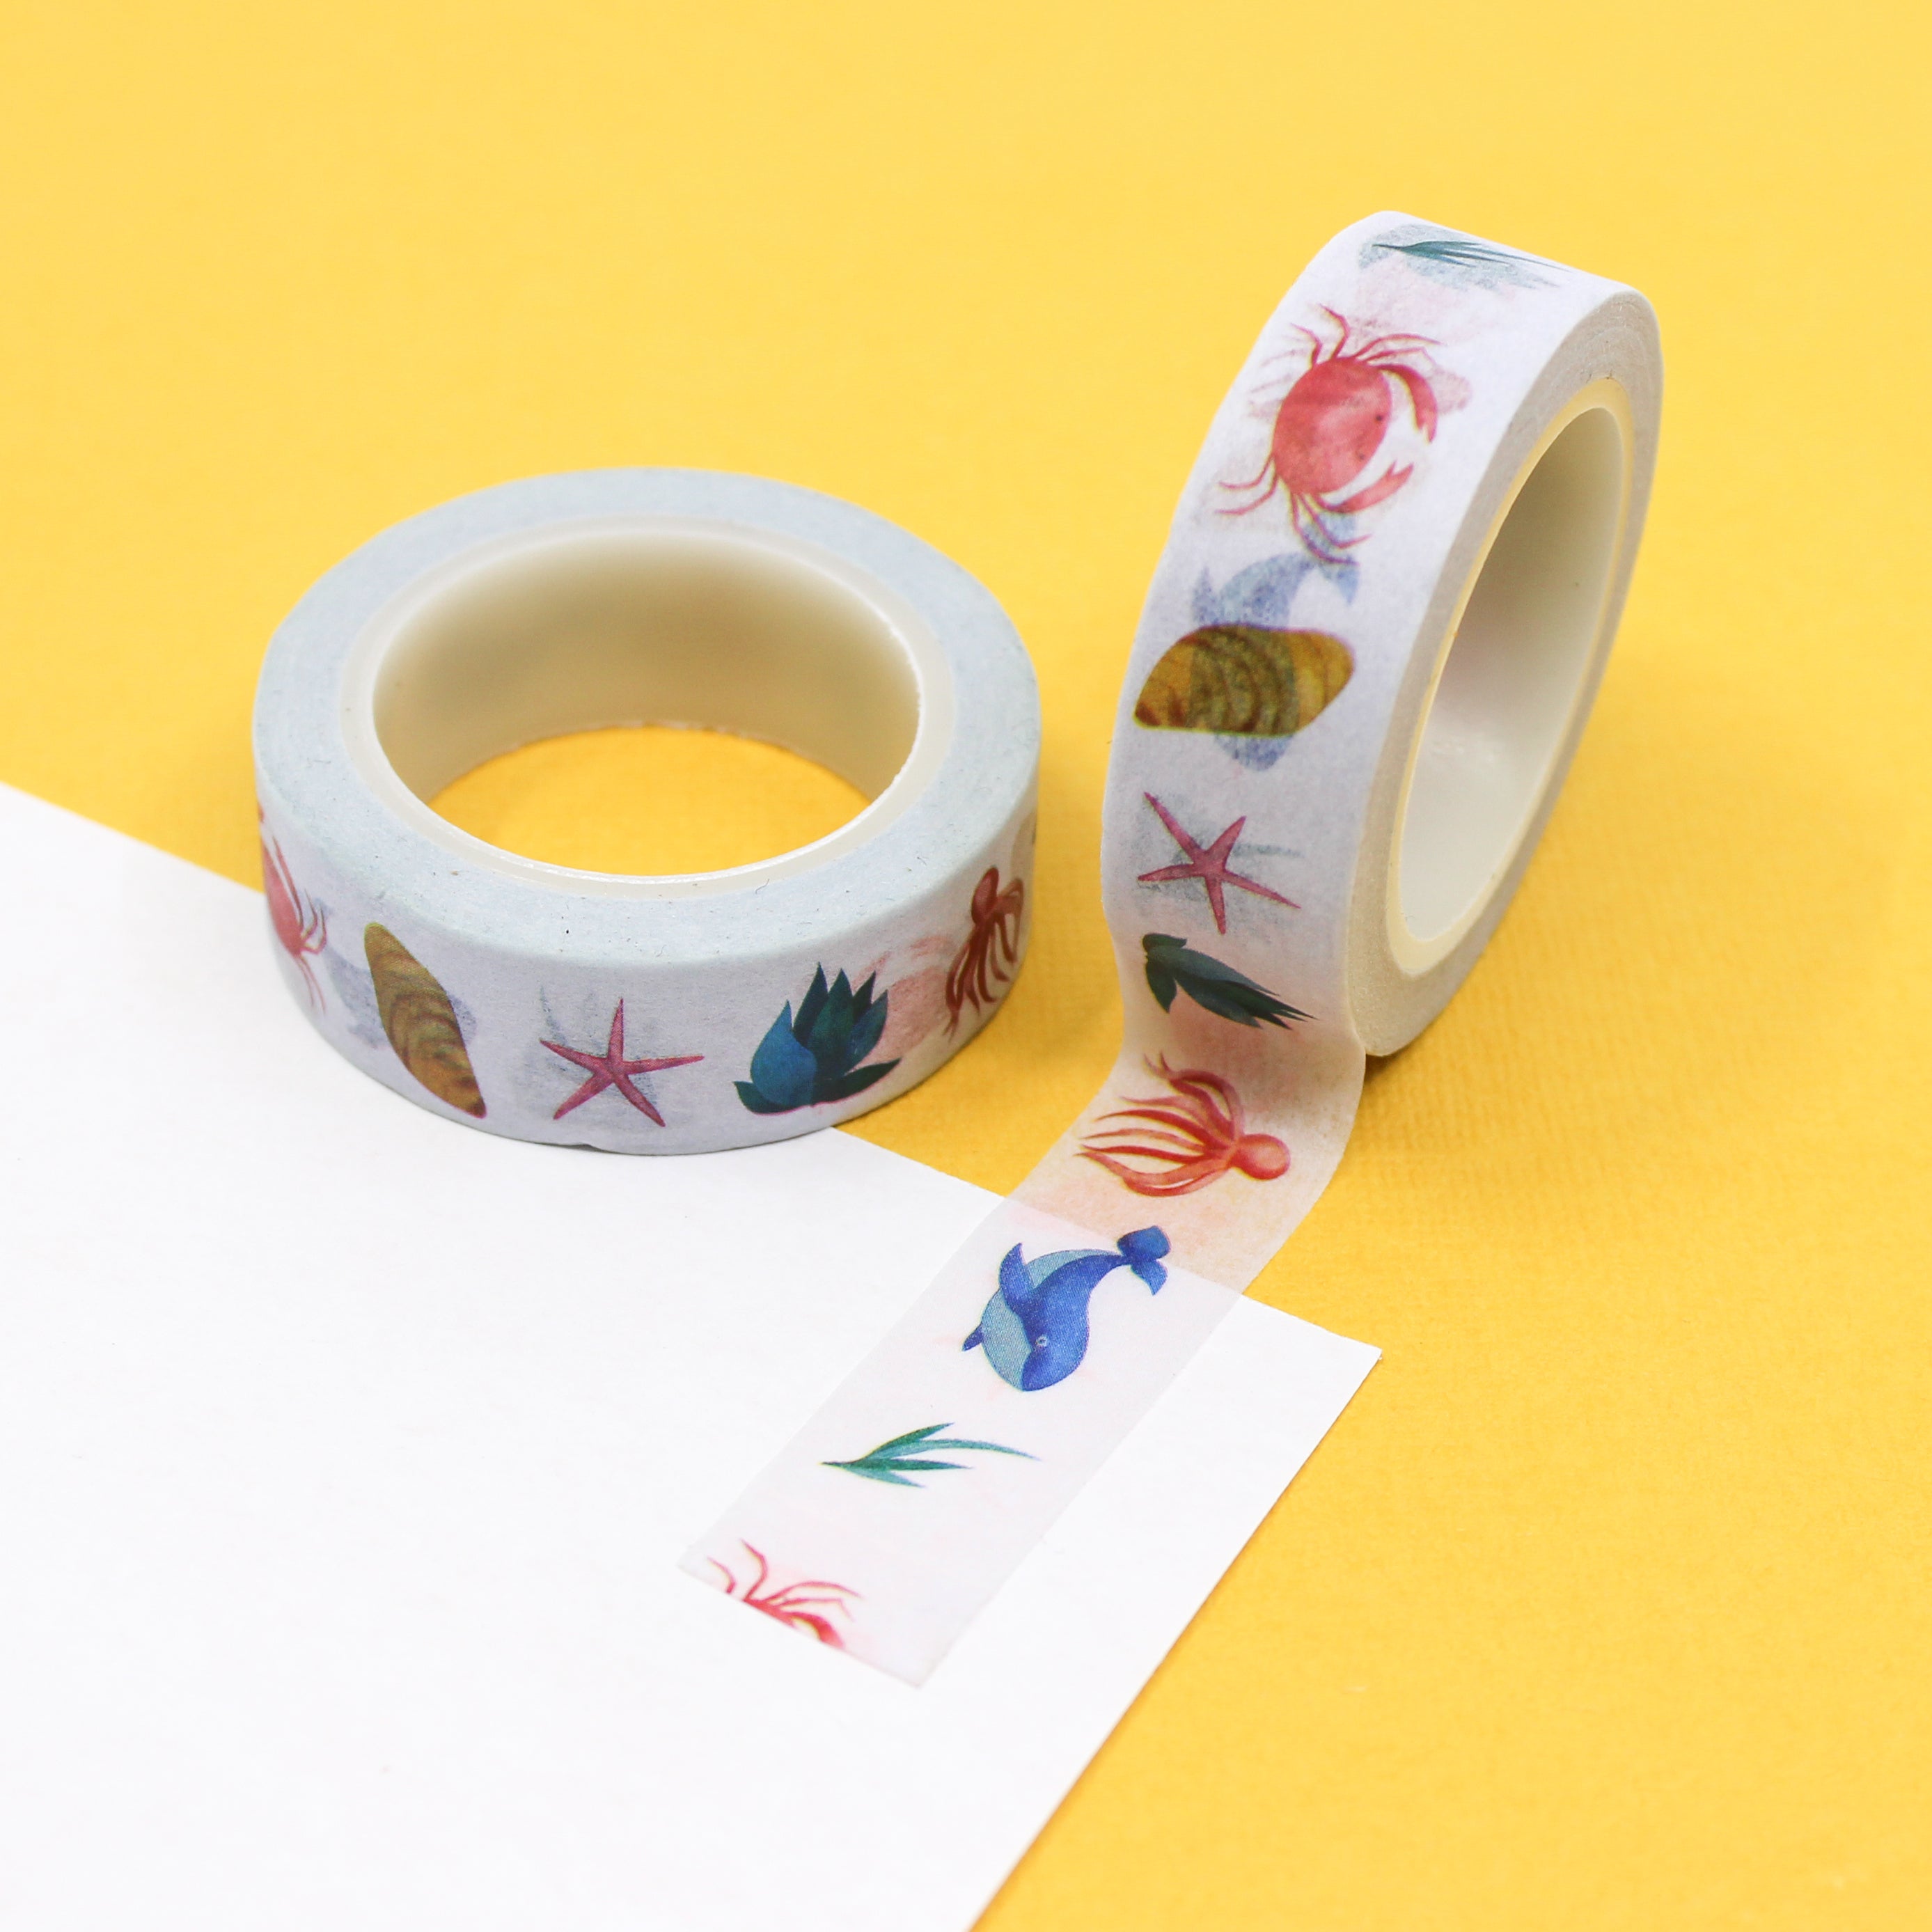 Dive into creativity with our Sea Creatures Washi Tape, adorned with delightful underwater motifs. Ideal for adding an aquatic and playful touch to your projects. This tape is sold at BBB Supplies Craft Shop.